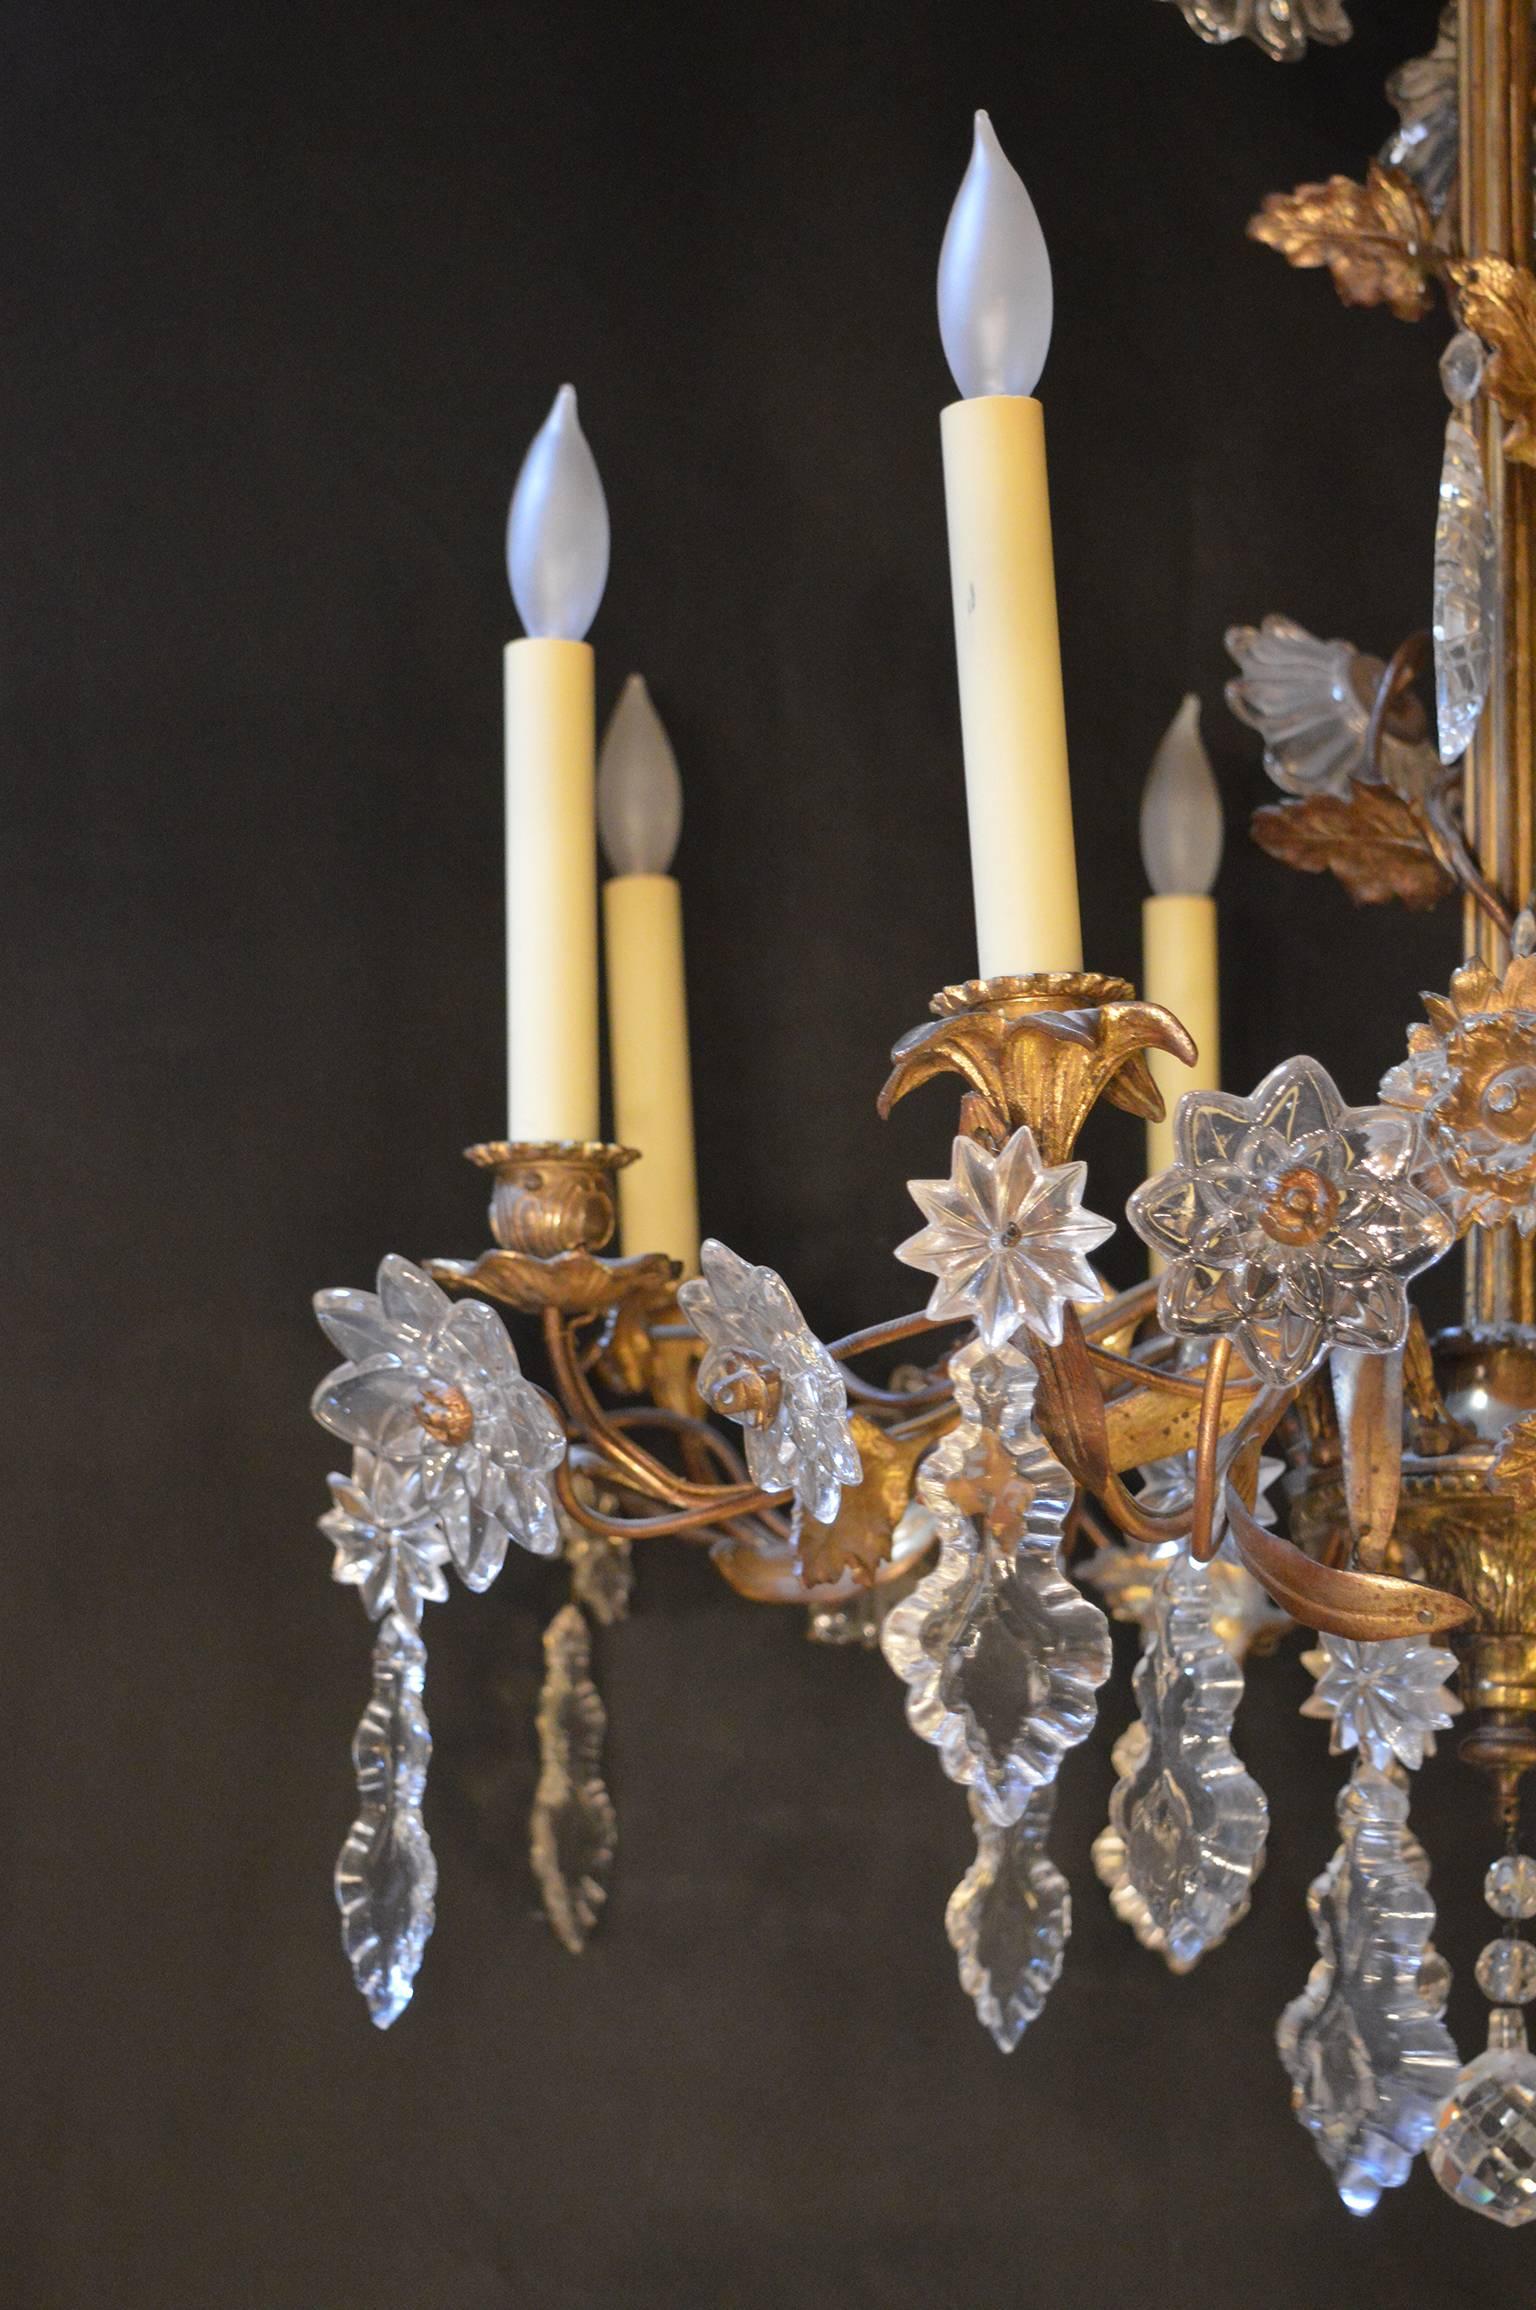 Chandelier has floral details. There is a brass vine wrapped around the arms of the chandelier as well a climbing to the top to create the canopy. Crystal creates the florets on each arm.